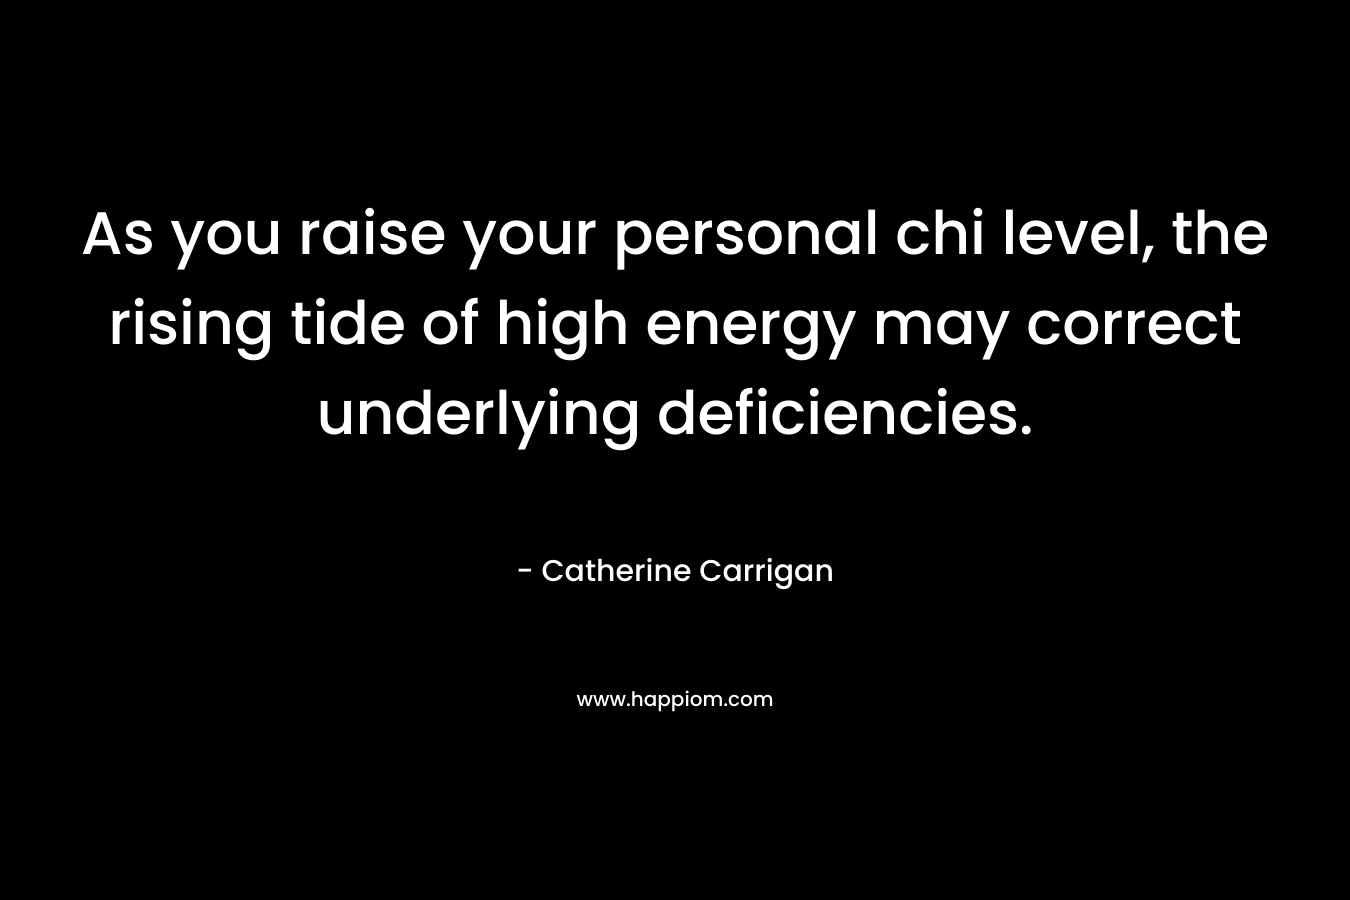 As you raise your personal chi level, the rising tide of high energy may correct underlying deficiencies. – Catherine Carrigan